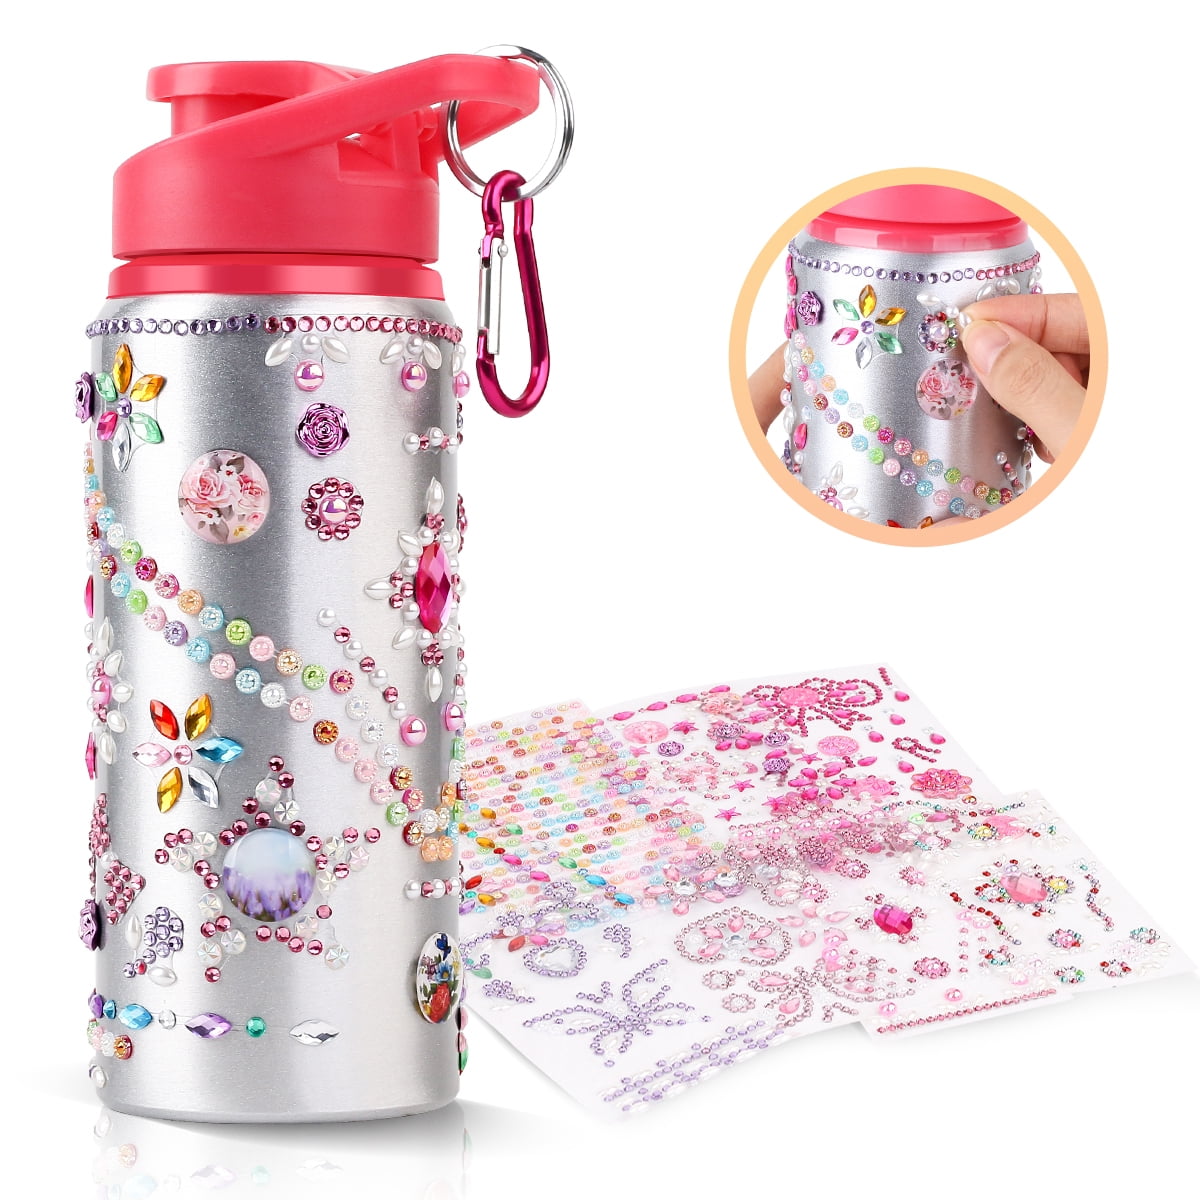  Gifts for Girls, Decorate Personalize Your Own Water Bottles  for Girls, Art Supplies for Girls Teen, Arts and Crafts Kit for Kids,  Birthday DIY Girl Gift Ideas, Valentine Day Gifts for